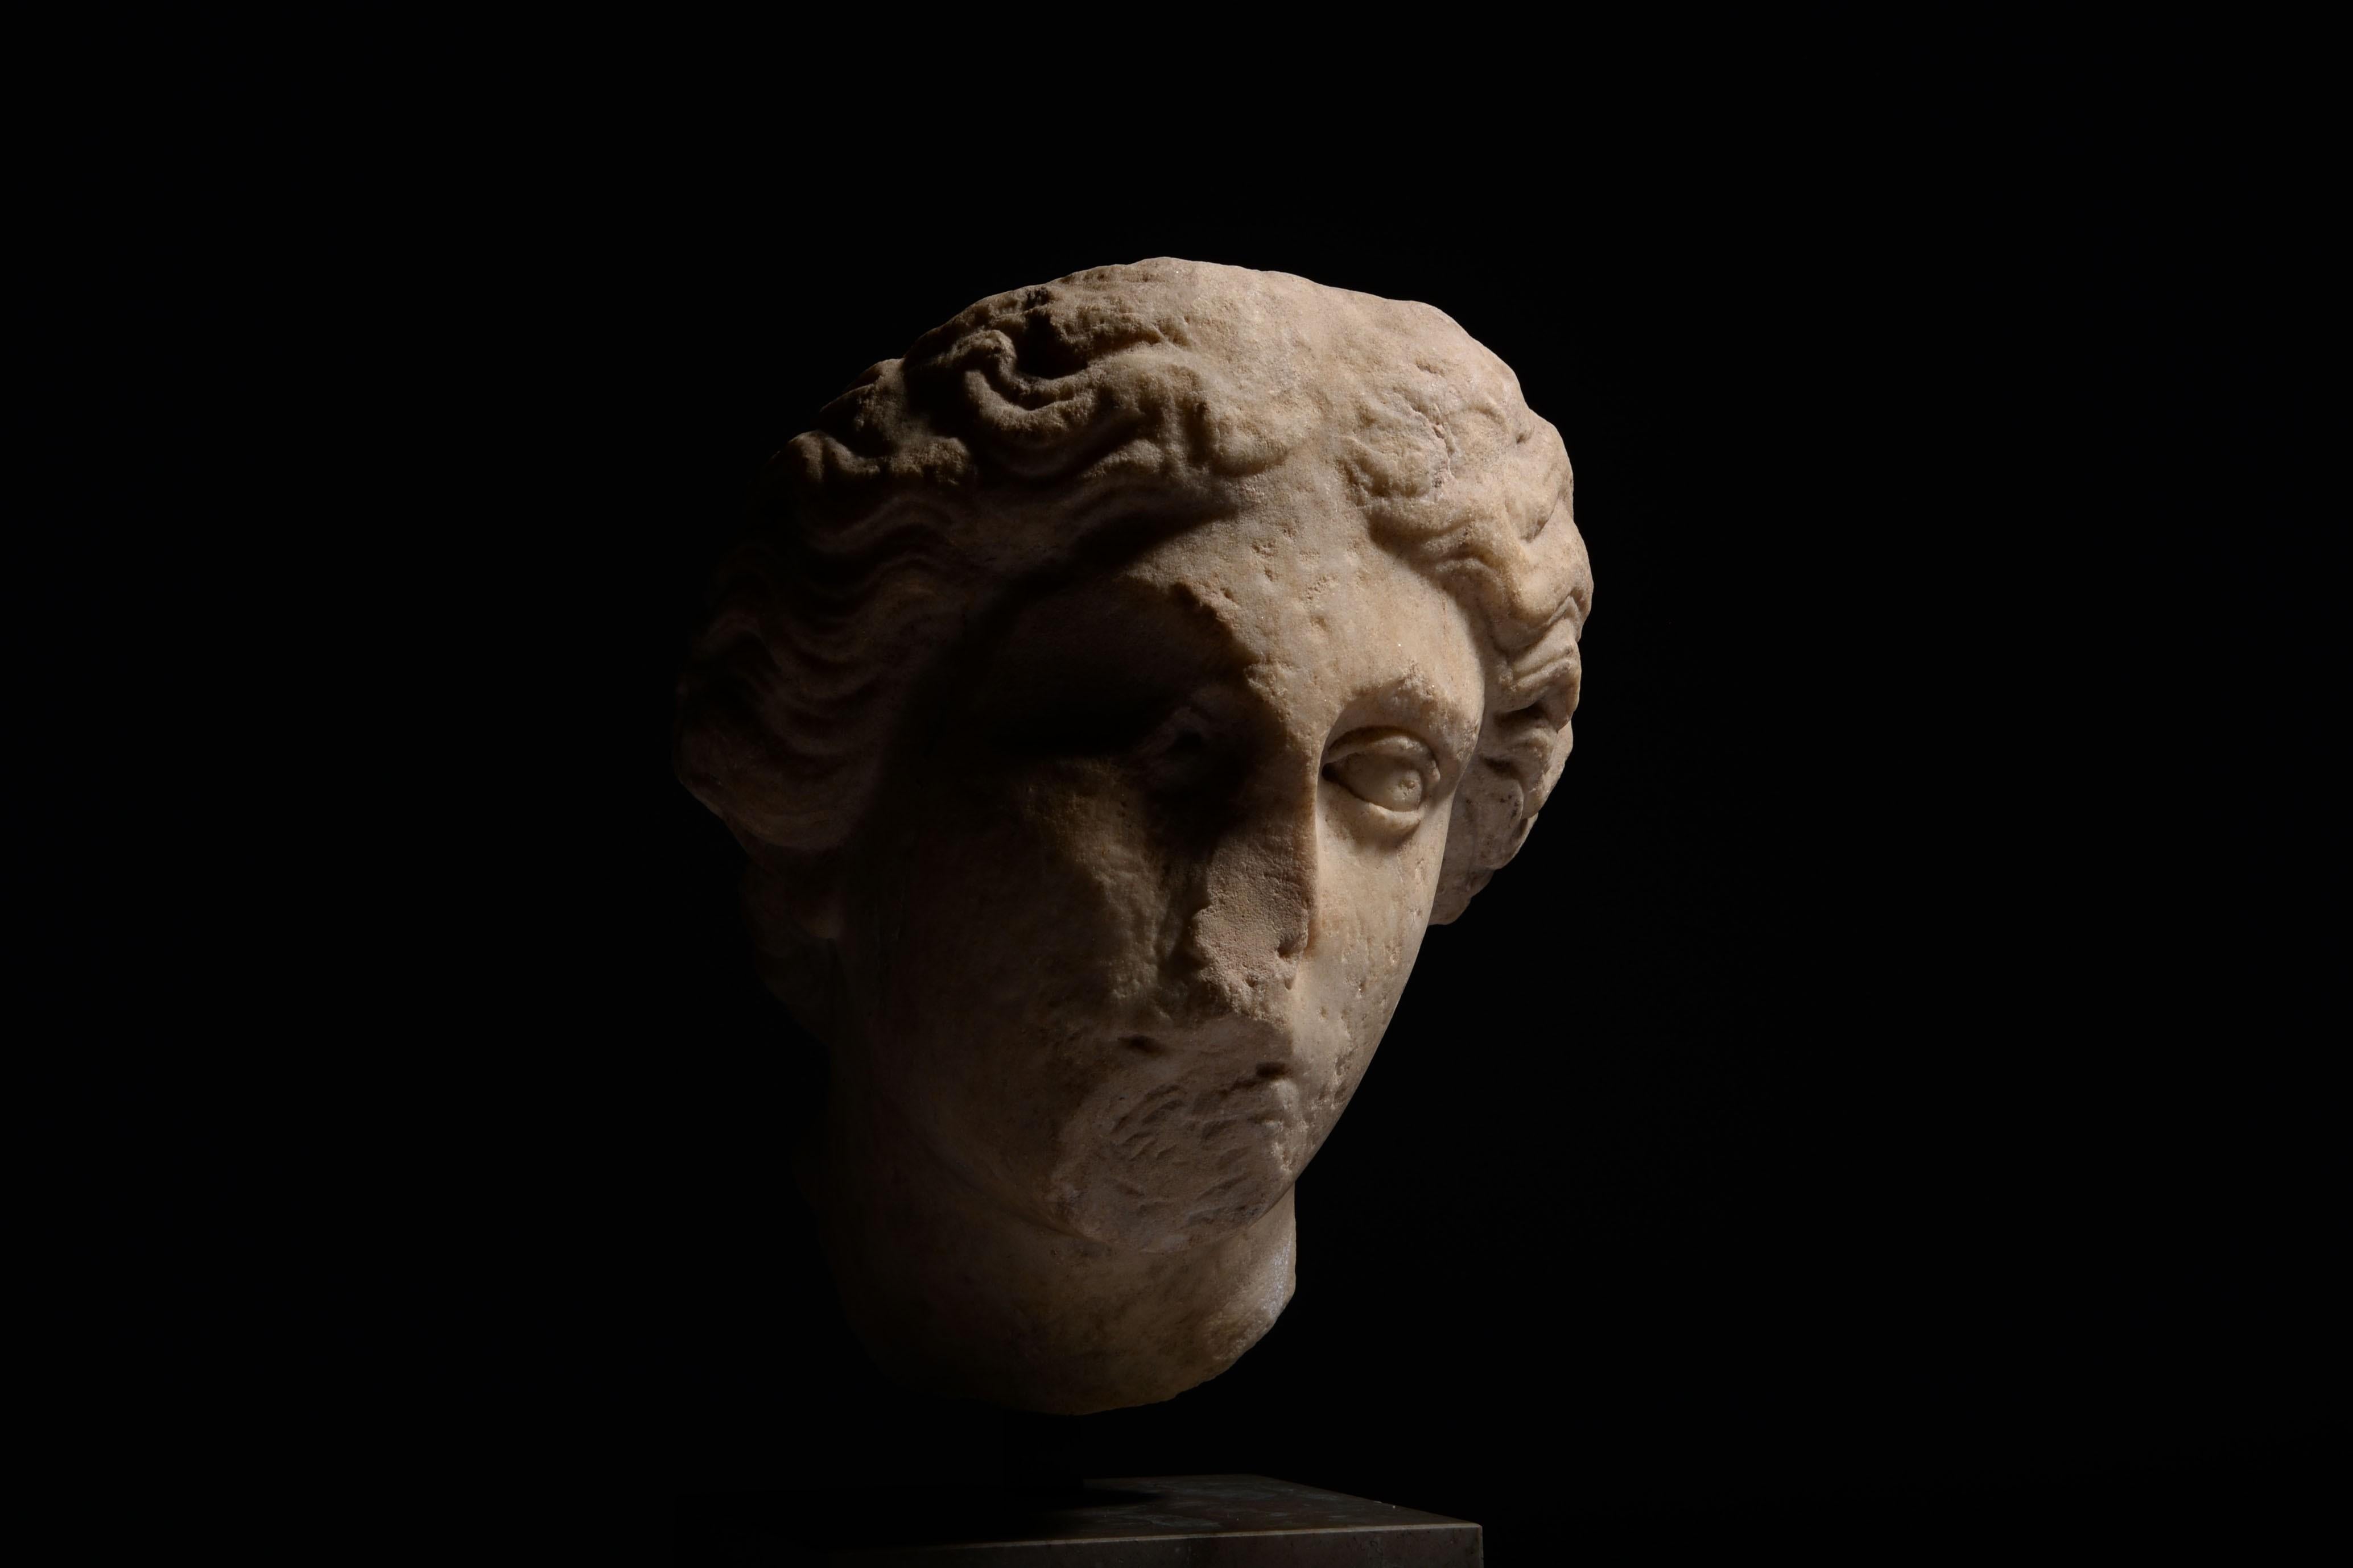 This beautiful marble head of Athena, or Minerva to the Romans, is full of pathos, with melancholic, almond-shaped eyes framed by a sweeping brow. An iron tenon protruding from the centre of her head was probably once used to attach a bronze